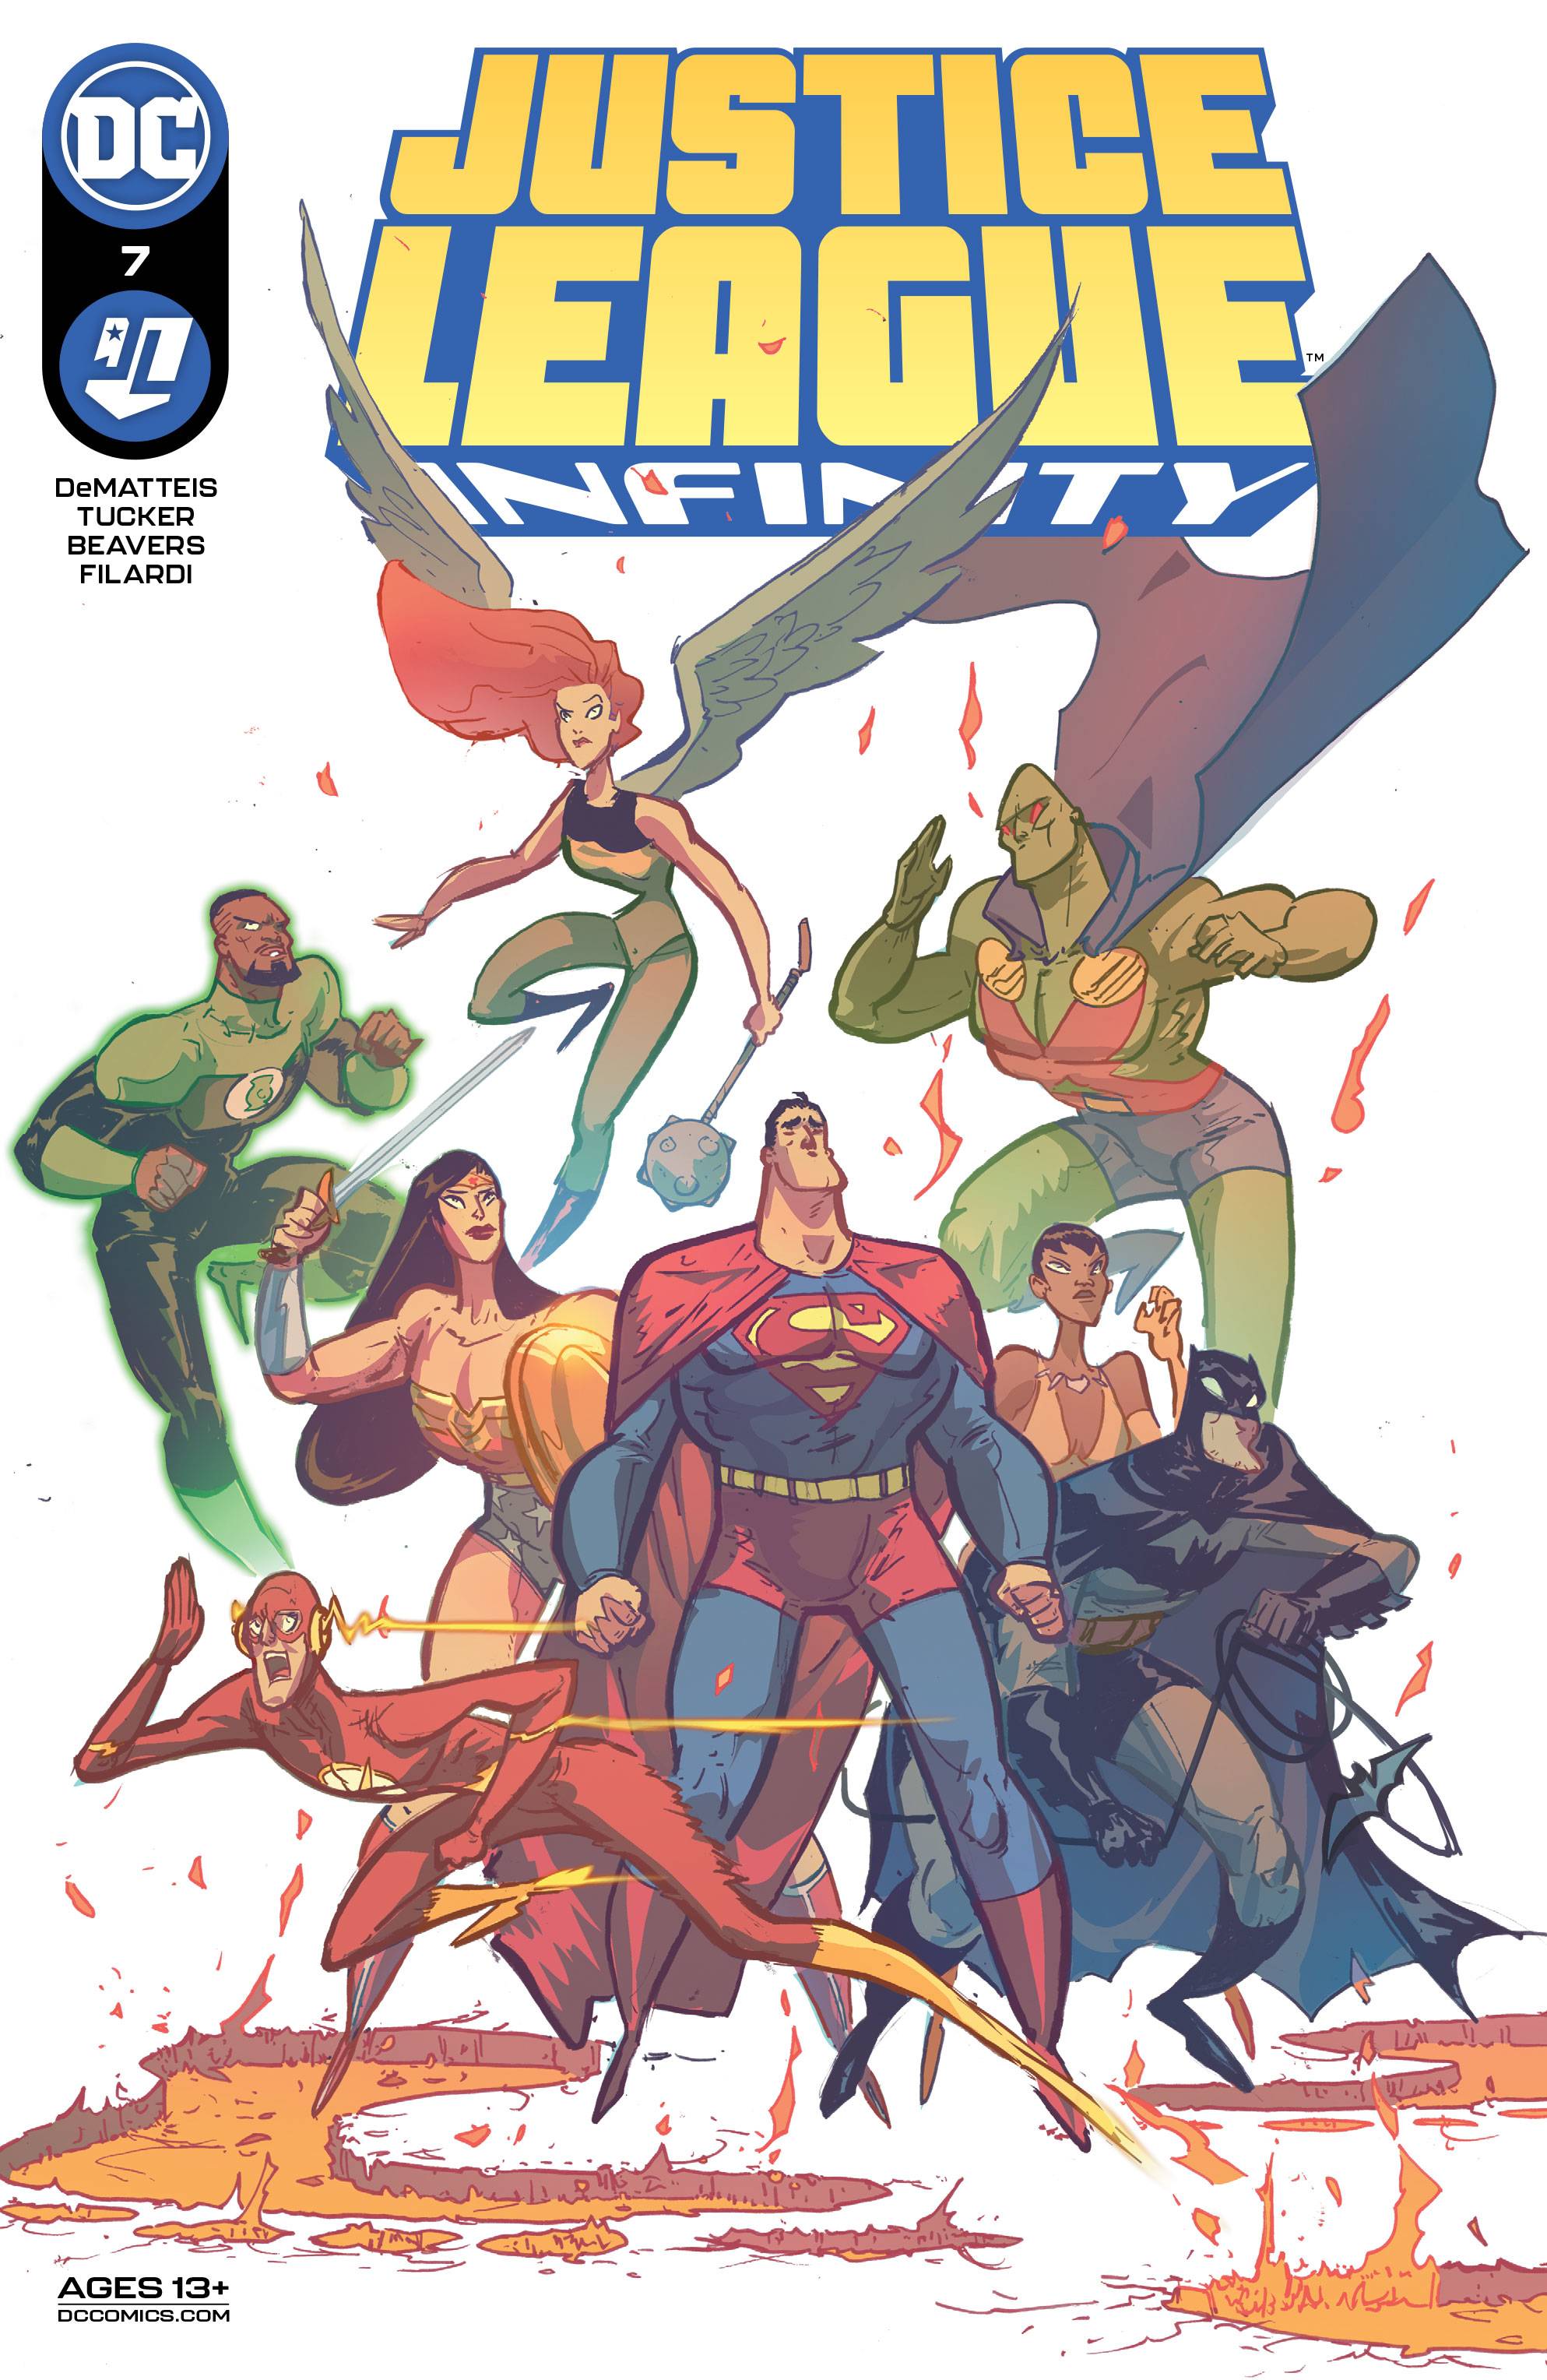 JUSTICE LEAGUE INFINITY #7 (OF 7) | Game Master's Emporium (The New GME)